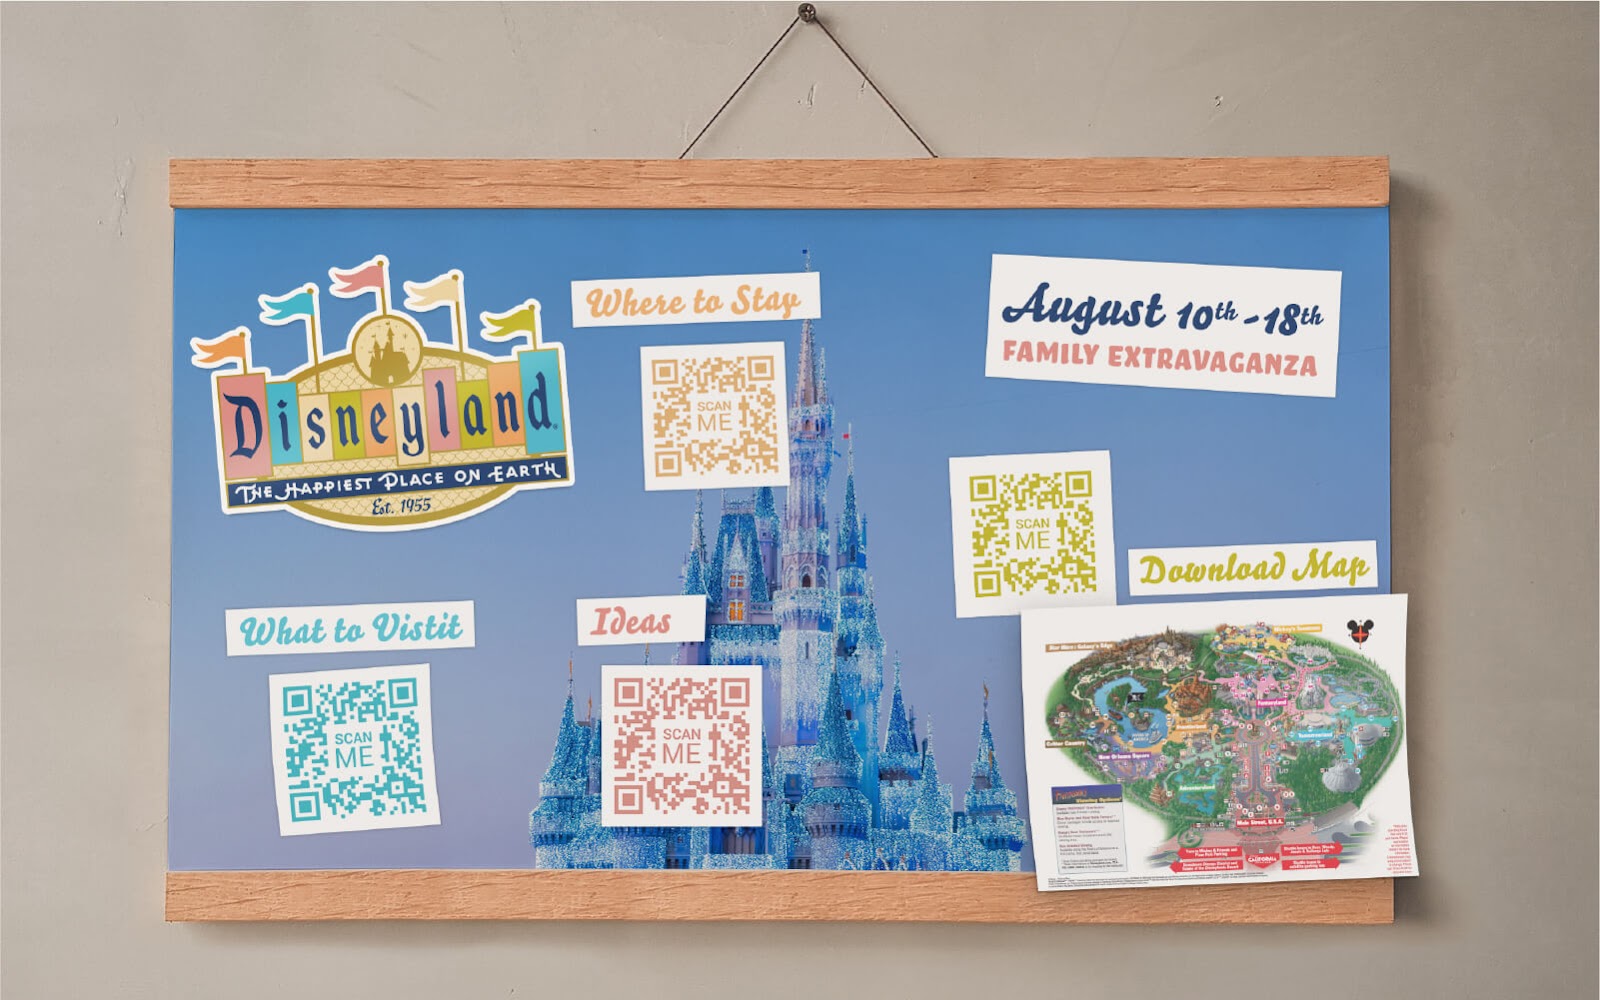 Board filled with QR Codes and images related to travel at Disneyland